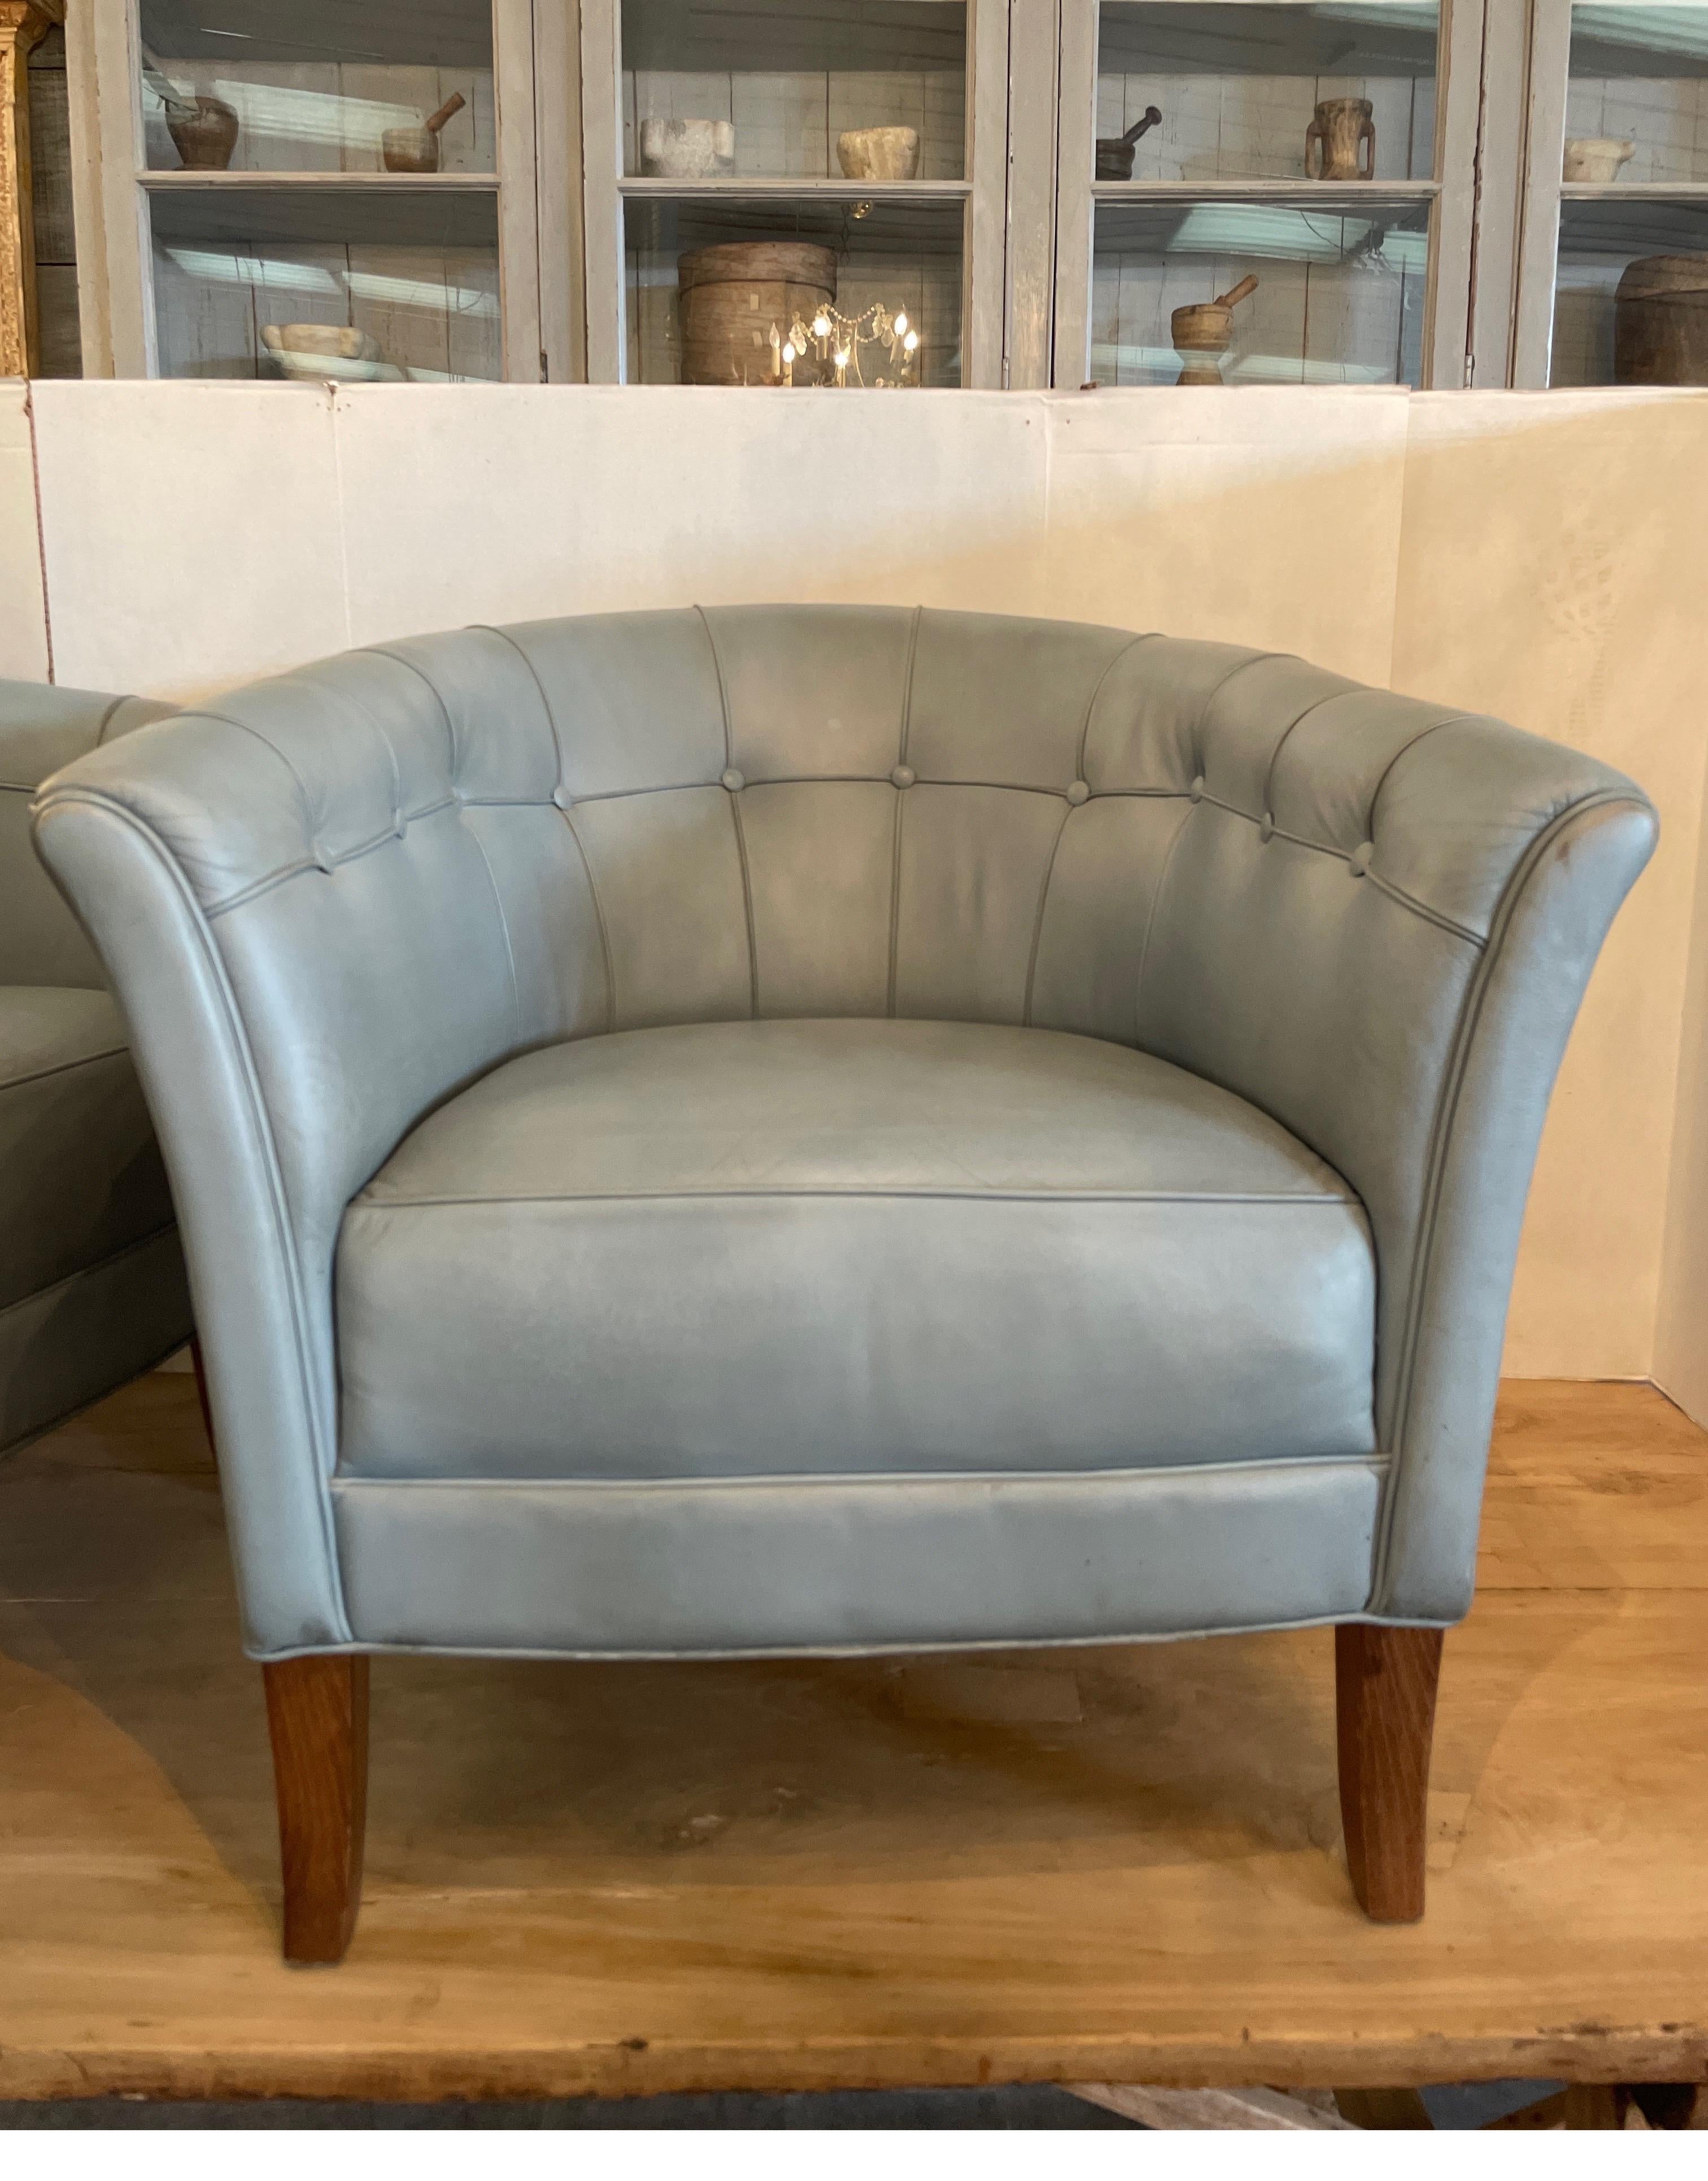 Swedish born designer Arnie Norell born 1917 died 1970s mid century chairs with original leather in a periwinkle blue/grey . These chairs called Lord chairs are very comfortable and in great condition.  The only thing is that the leather is worn by